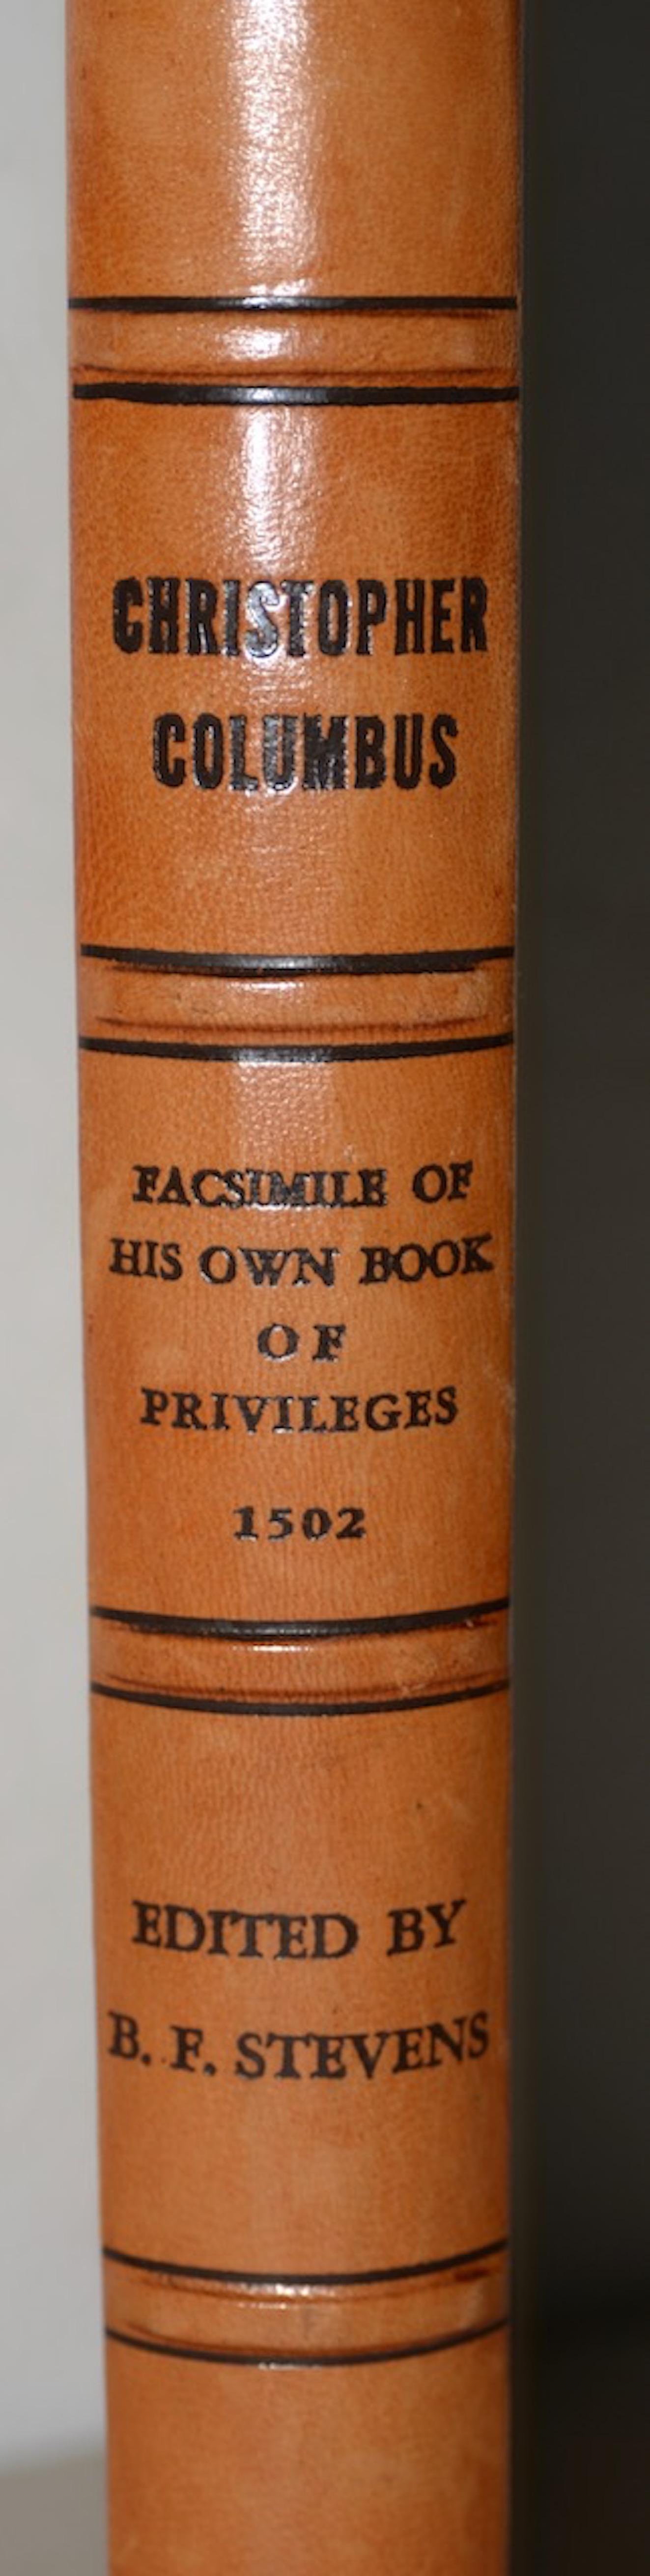 Christopher Columbus Fascimile of His Own Book of Privileges 1502, Mexico, 1992

This rare book is a collection of Christopher Columbus archives that are found in the Foreign Office in Paris.

Text with translation into English.

From a